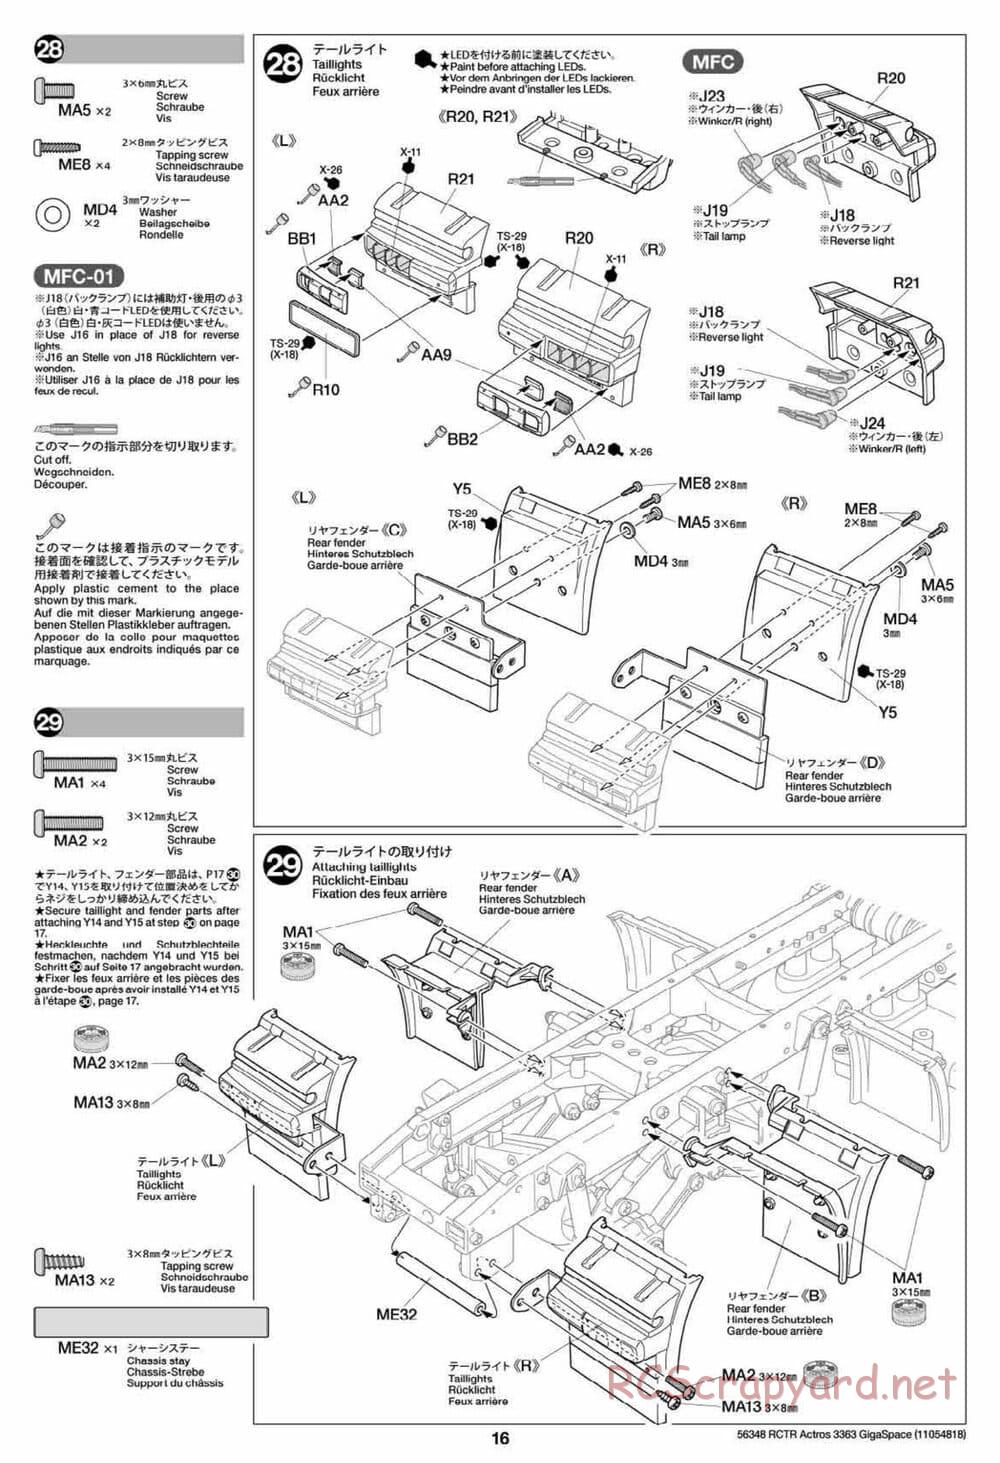 Tamiya - Mercedes-Benz Actros 3363 6x4 GigaSpace Tractor Truck Chassis - Manual - Page 16